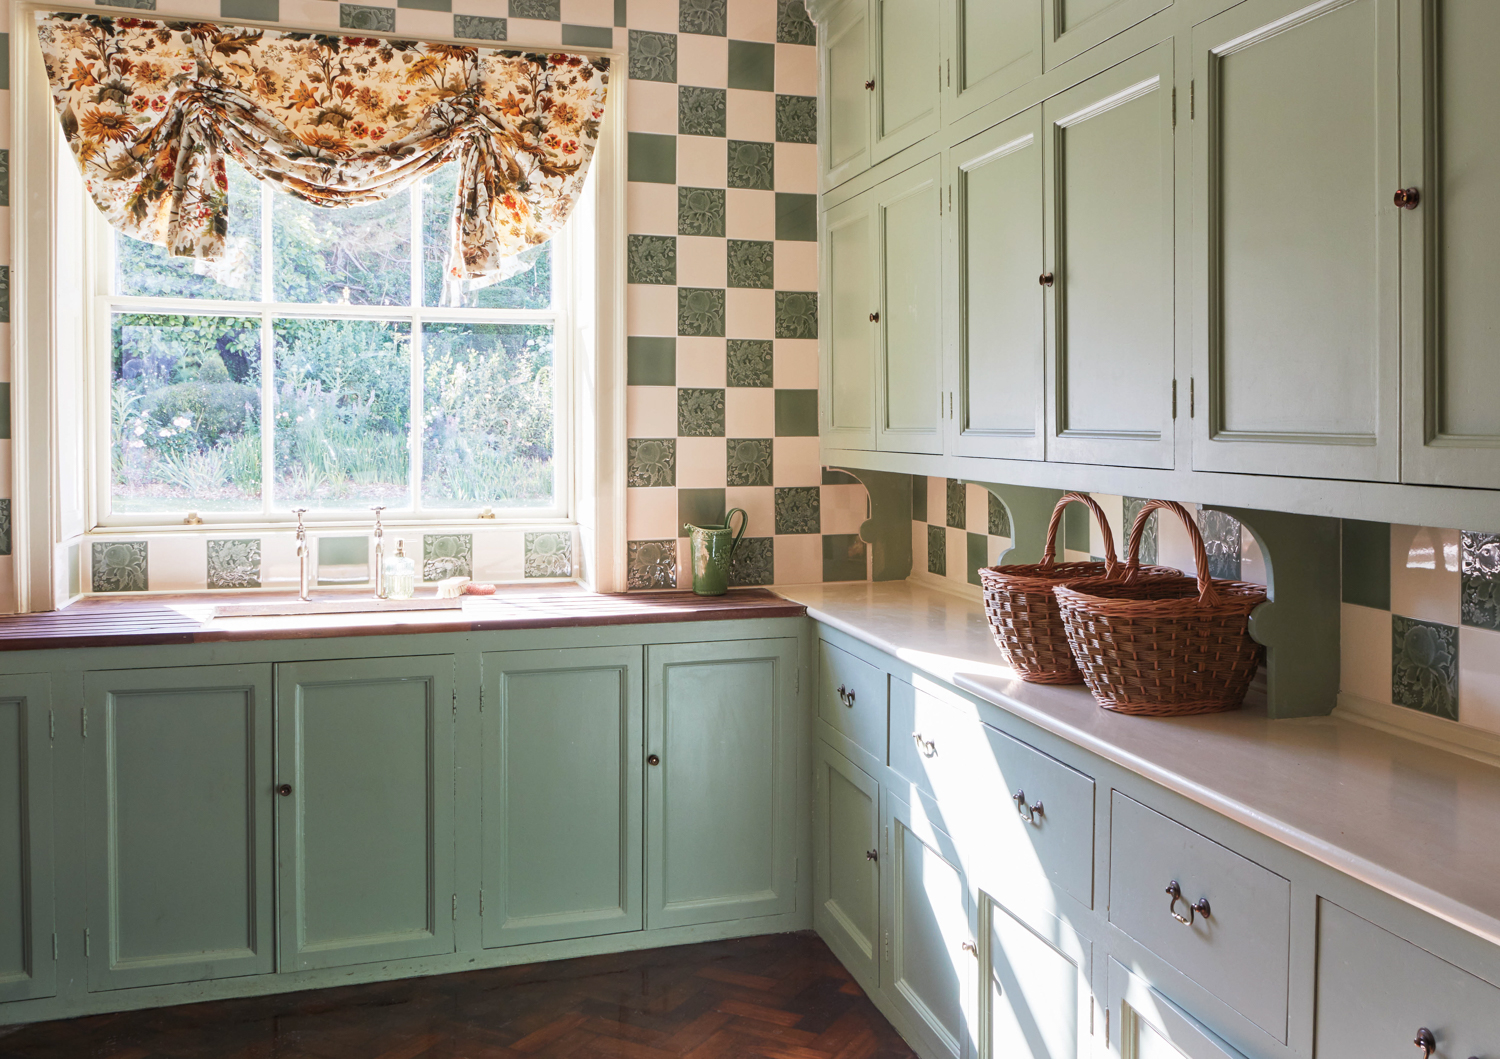 kitchen with checkered tile, green cabinets and window, part of tile collection